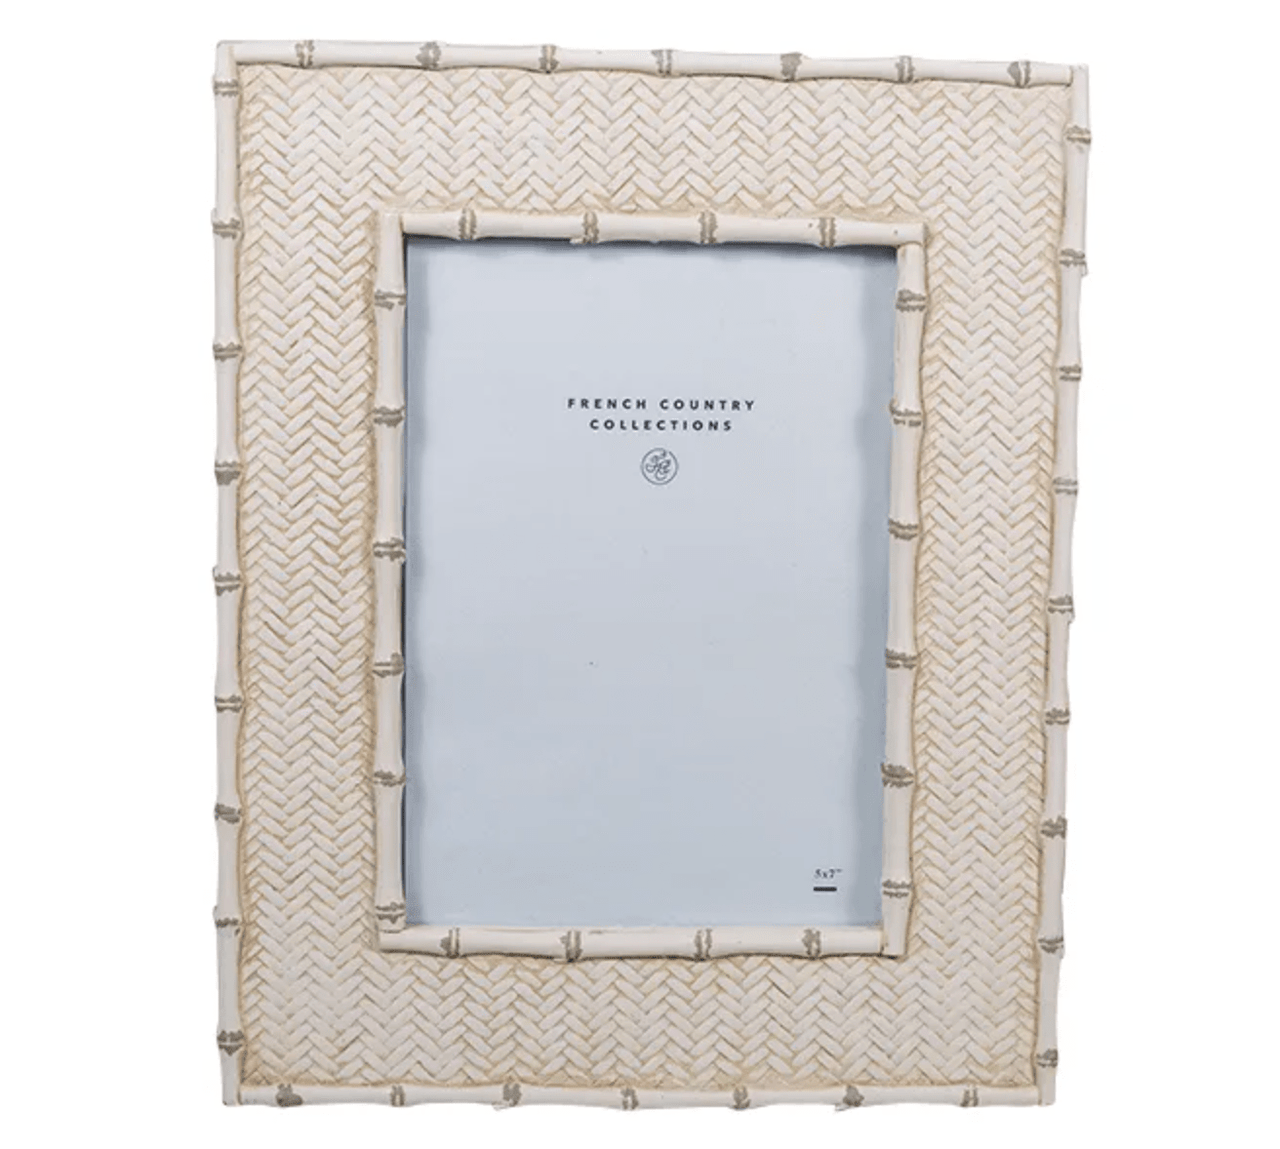 Dermont White Wash Photo Frame 5x7" House of Dudley